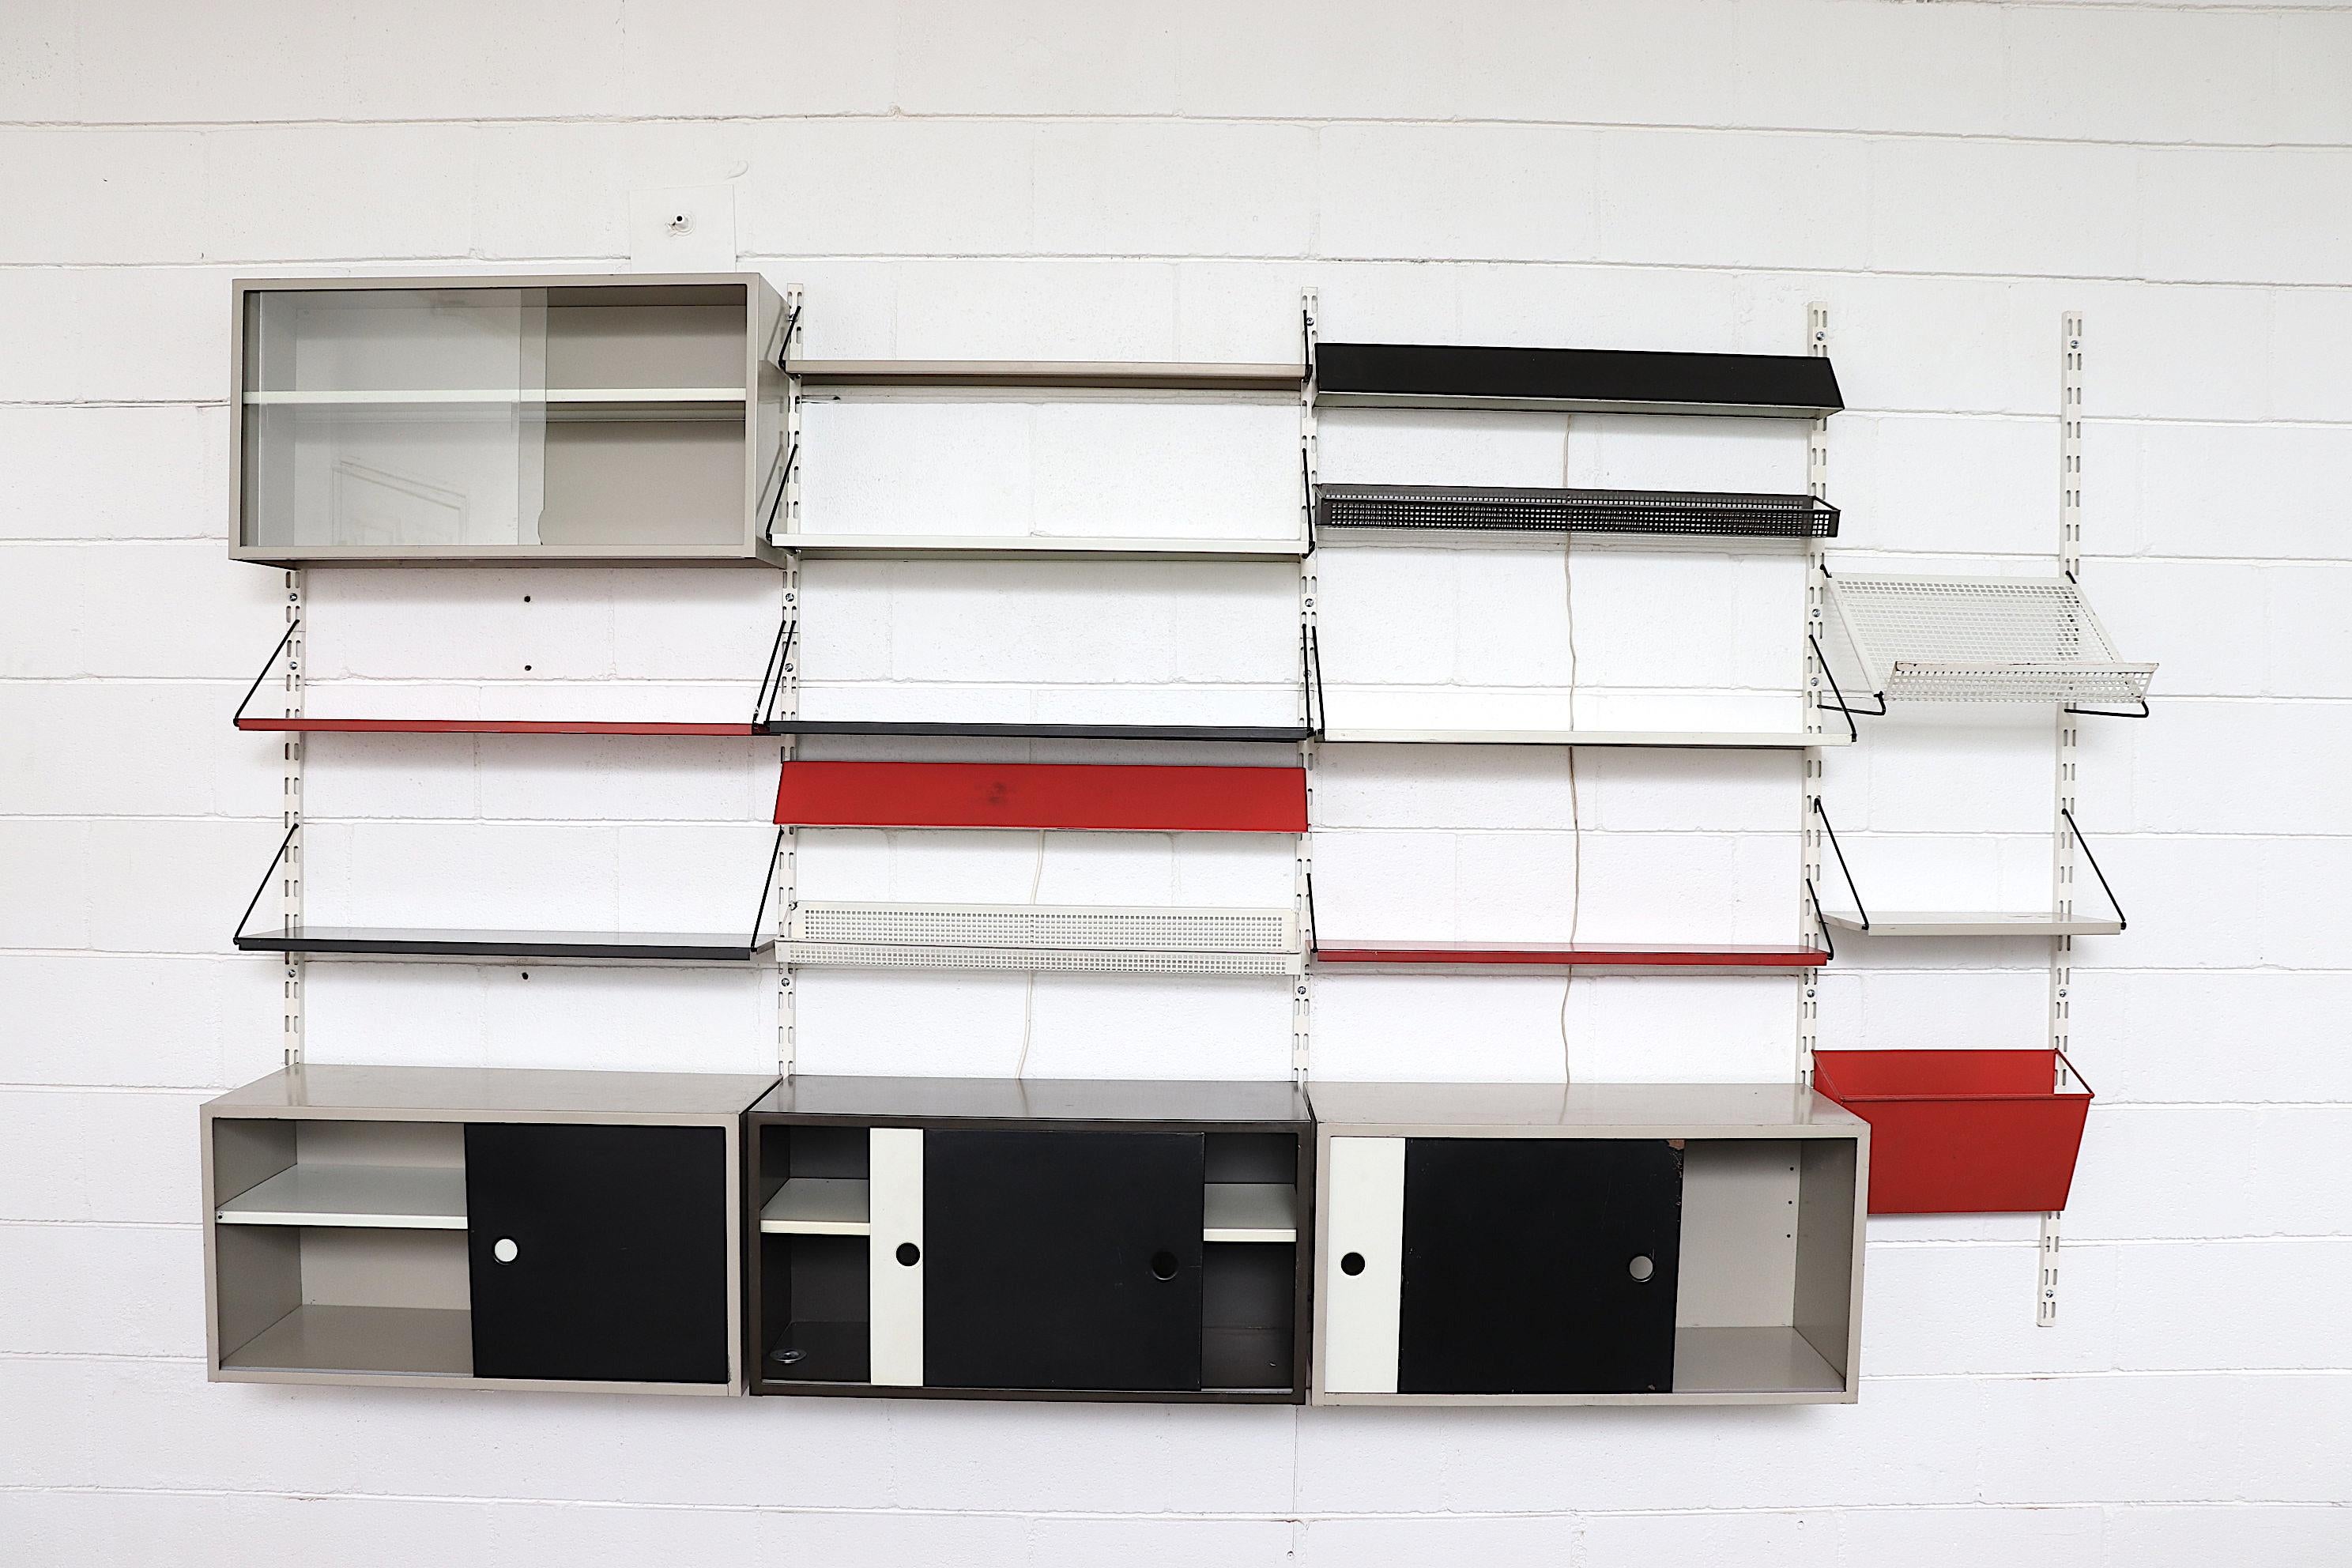 Large 4 Section Pilastro Modular Industrial Wall Unit in Red, White and Black Enameled Metal. The Three Main Sections are Fitted with Adjustable Shelving and Storage Cabinets with Black and White Metal Sliding Doors, a Display Cabinet with Sliding